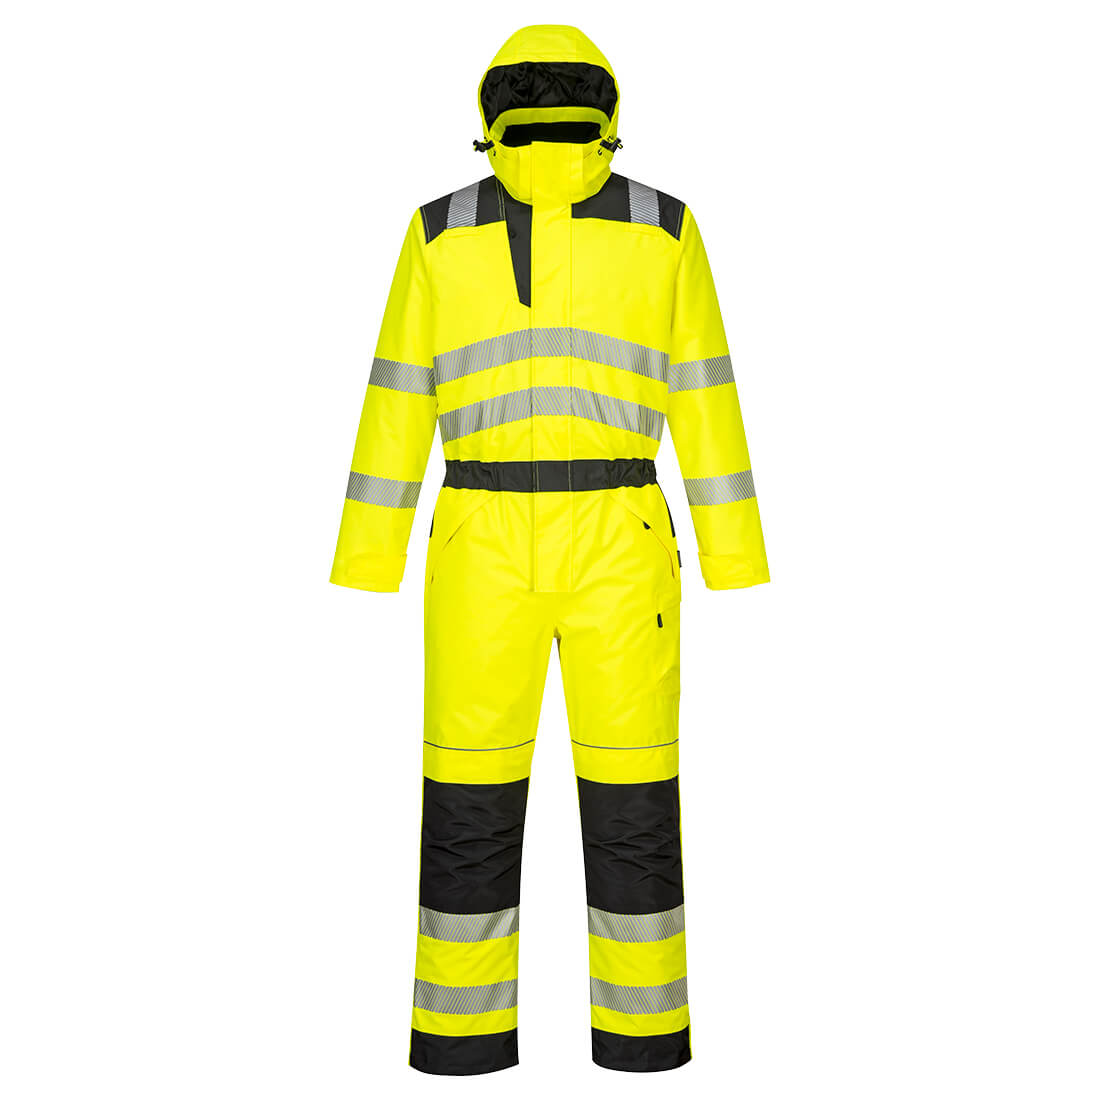 PW3 Hi-Vis Winter Coverall